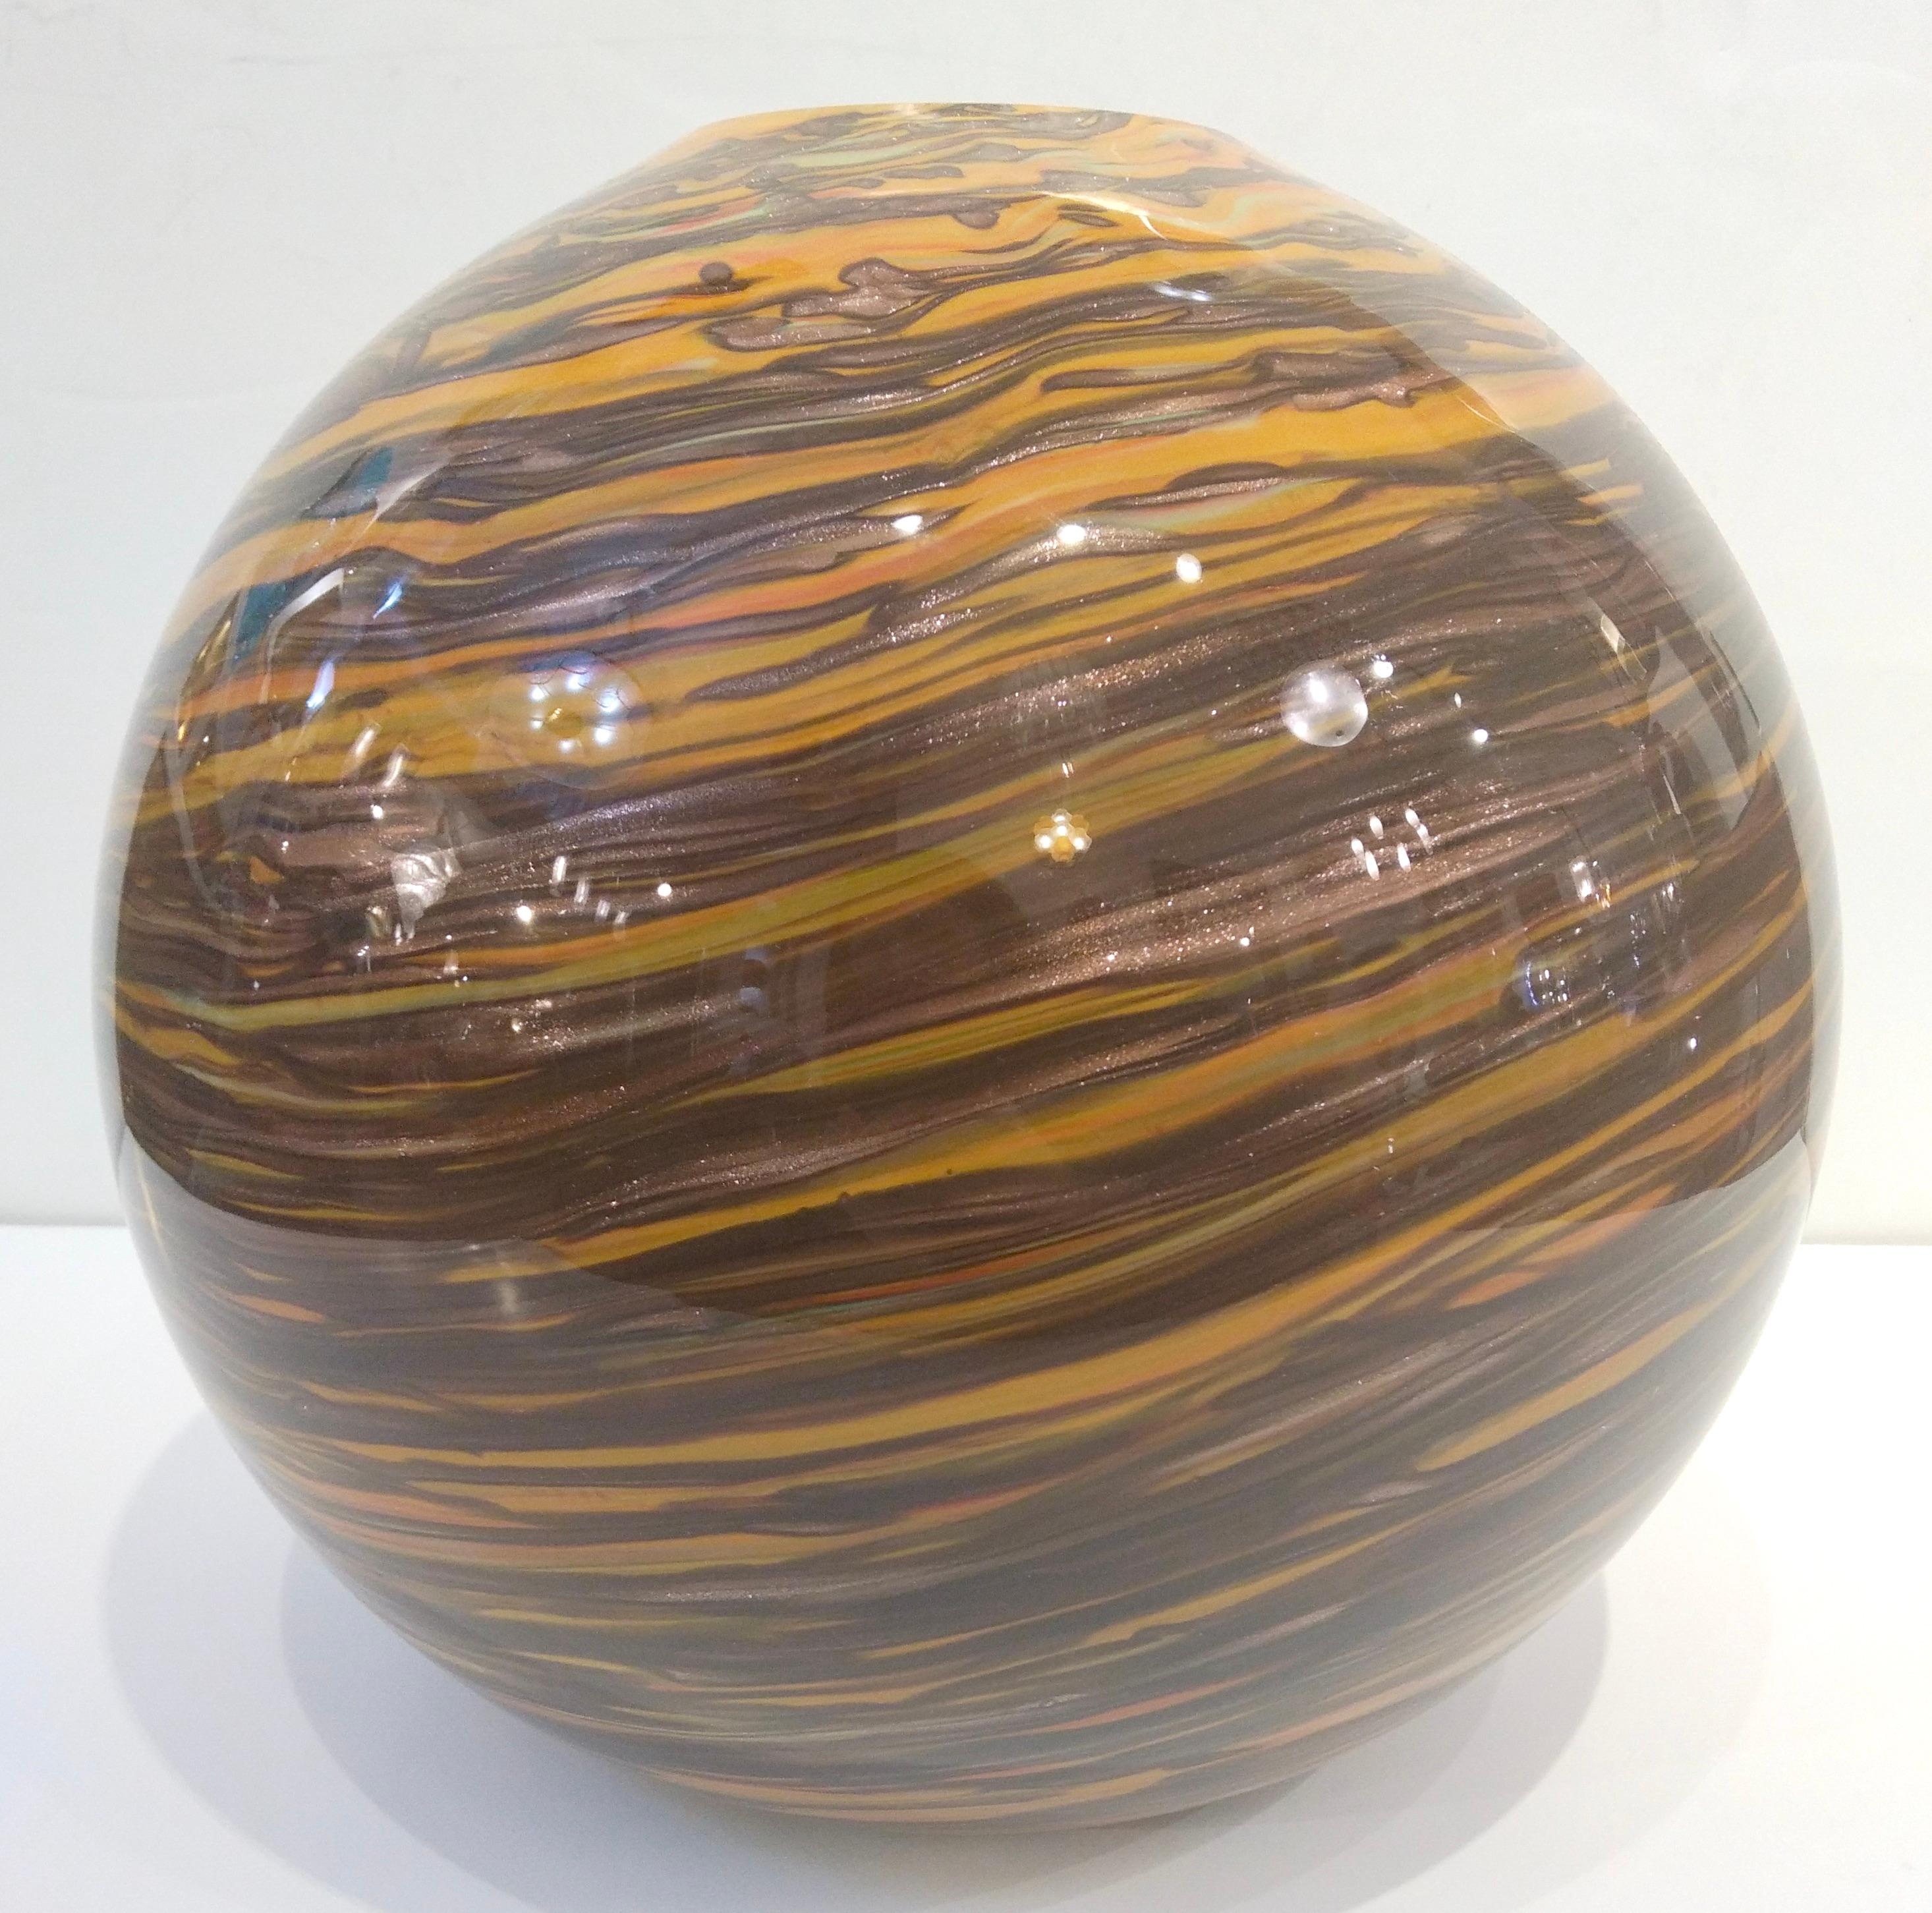 Formia 1980s Modern Round Brown Yellow Red Orange Gold Murano Glass Vase For Sale 3